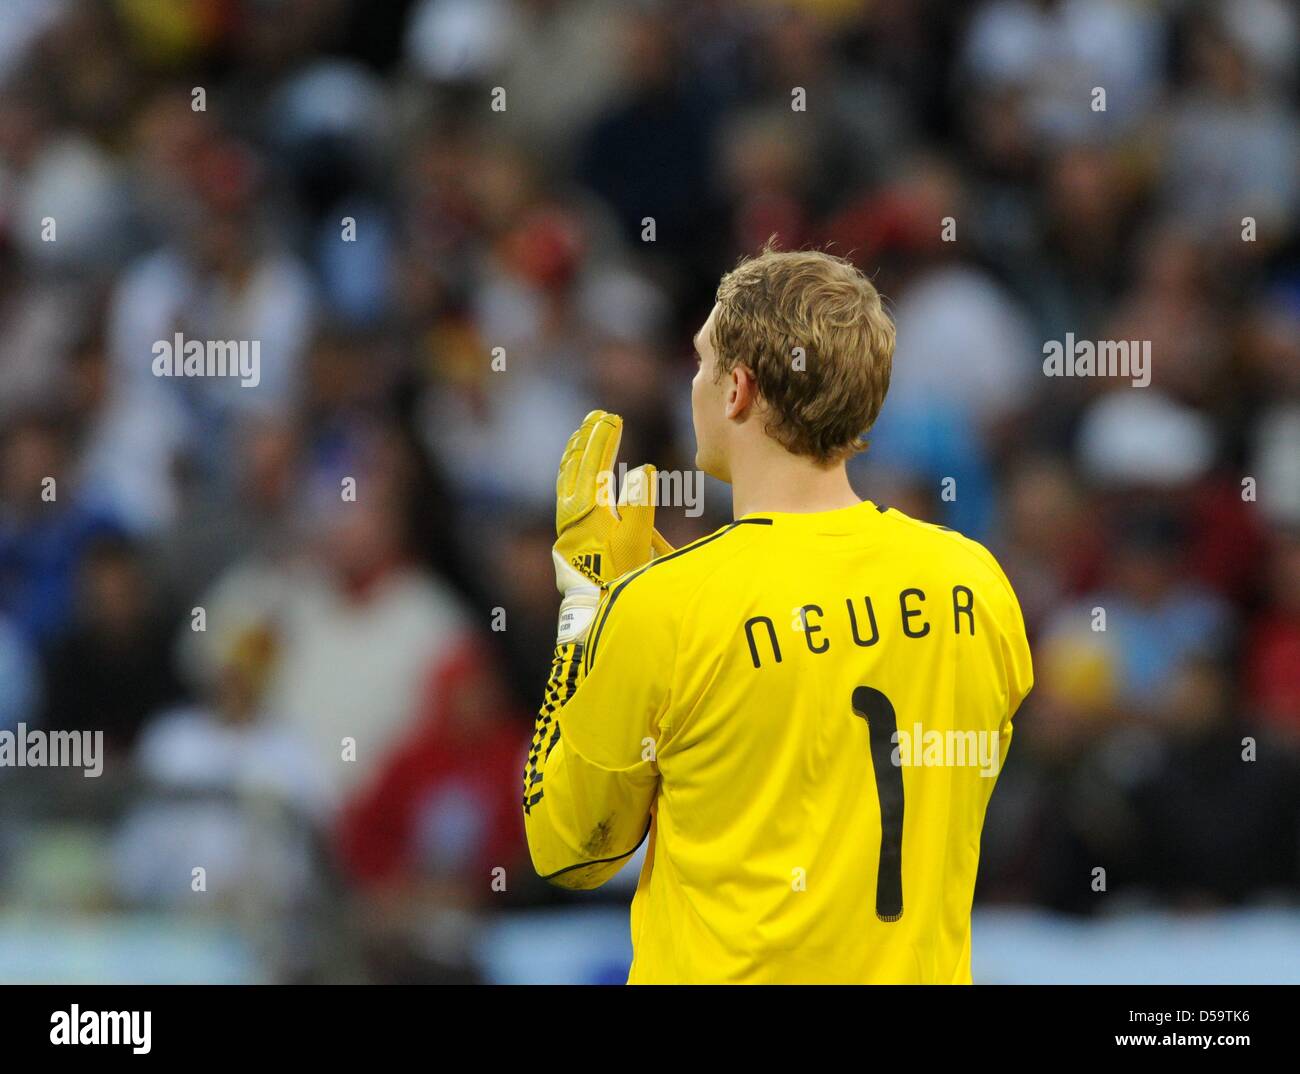 Germany's Manuel Neuer during the 2010 FIFA World Cup quarterfinal match between Argentina and Germany at the Green Point Stadium in Cape Town, South Africa 03 July 2010. Germany won 4-0. Photo: Marcus Brandt dpa - Please refer to http://dpaq.de/FIFA-WM2010-TC Stock Photo